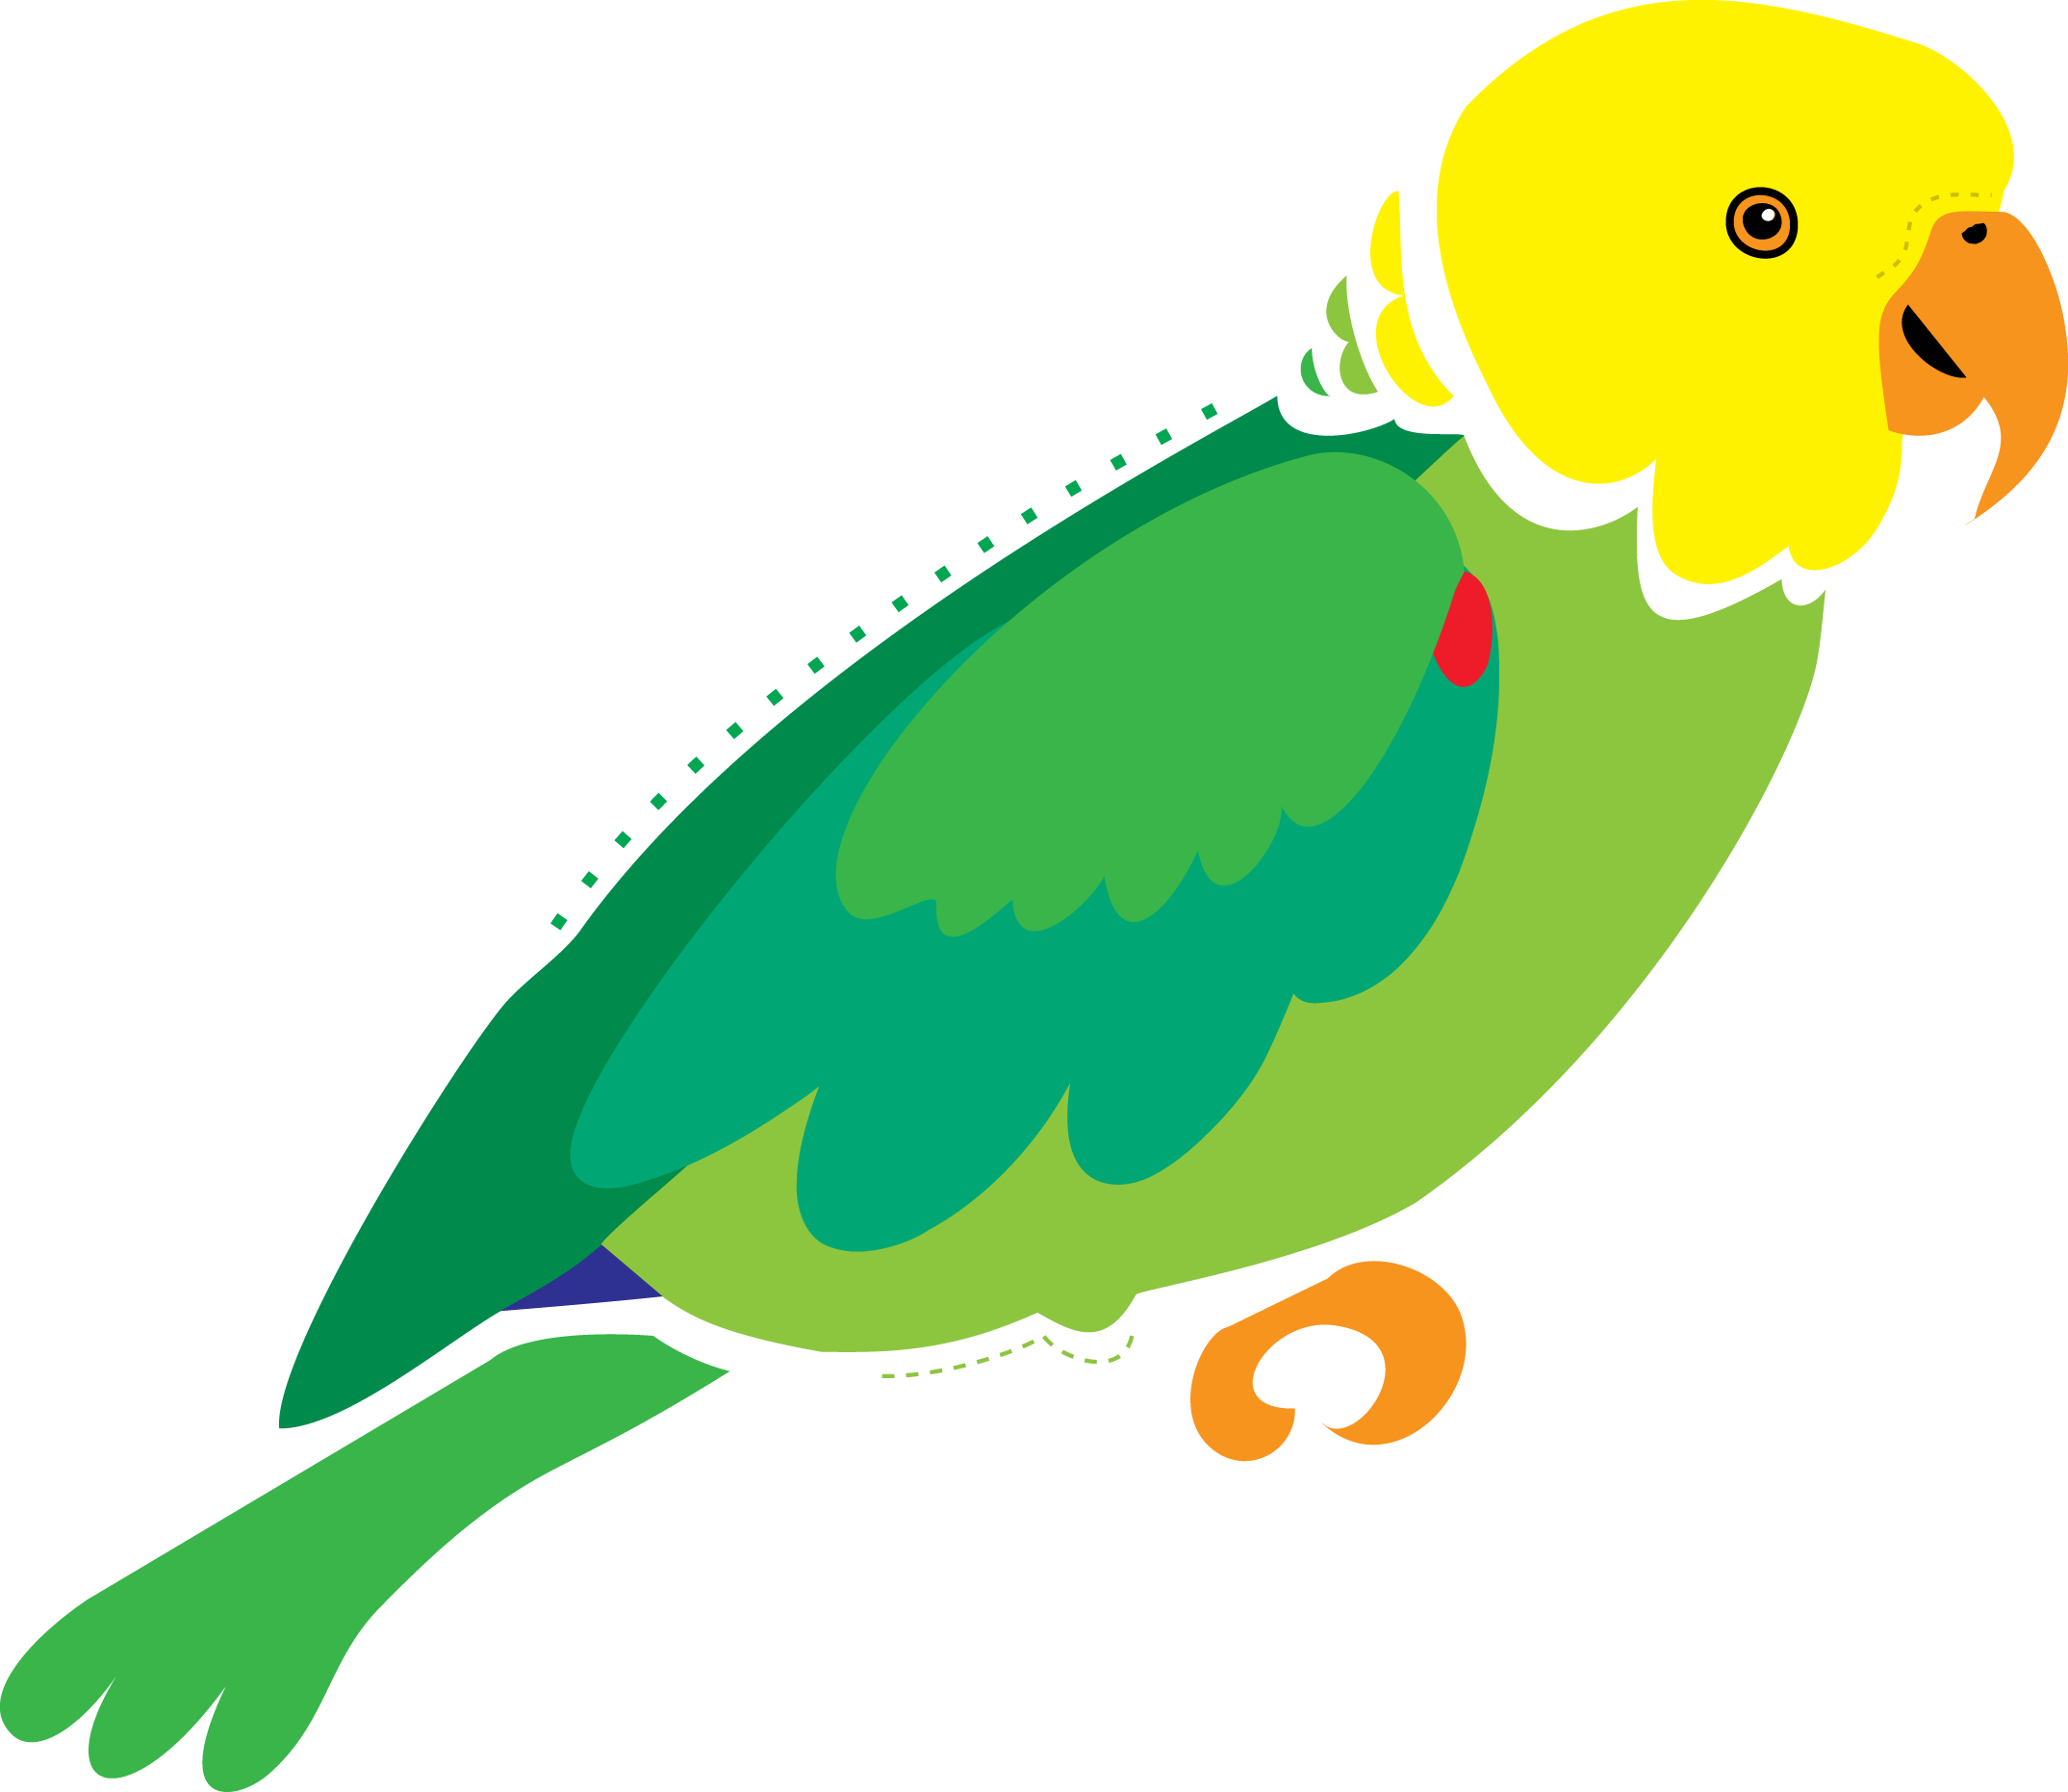 Abstracted Color Parrot - Parrot Illustration (2149x1862)